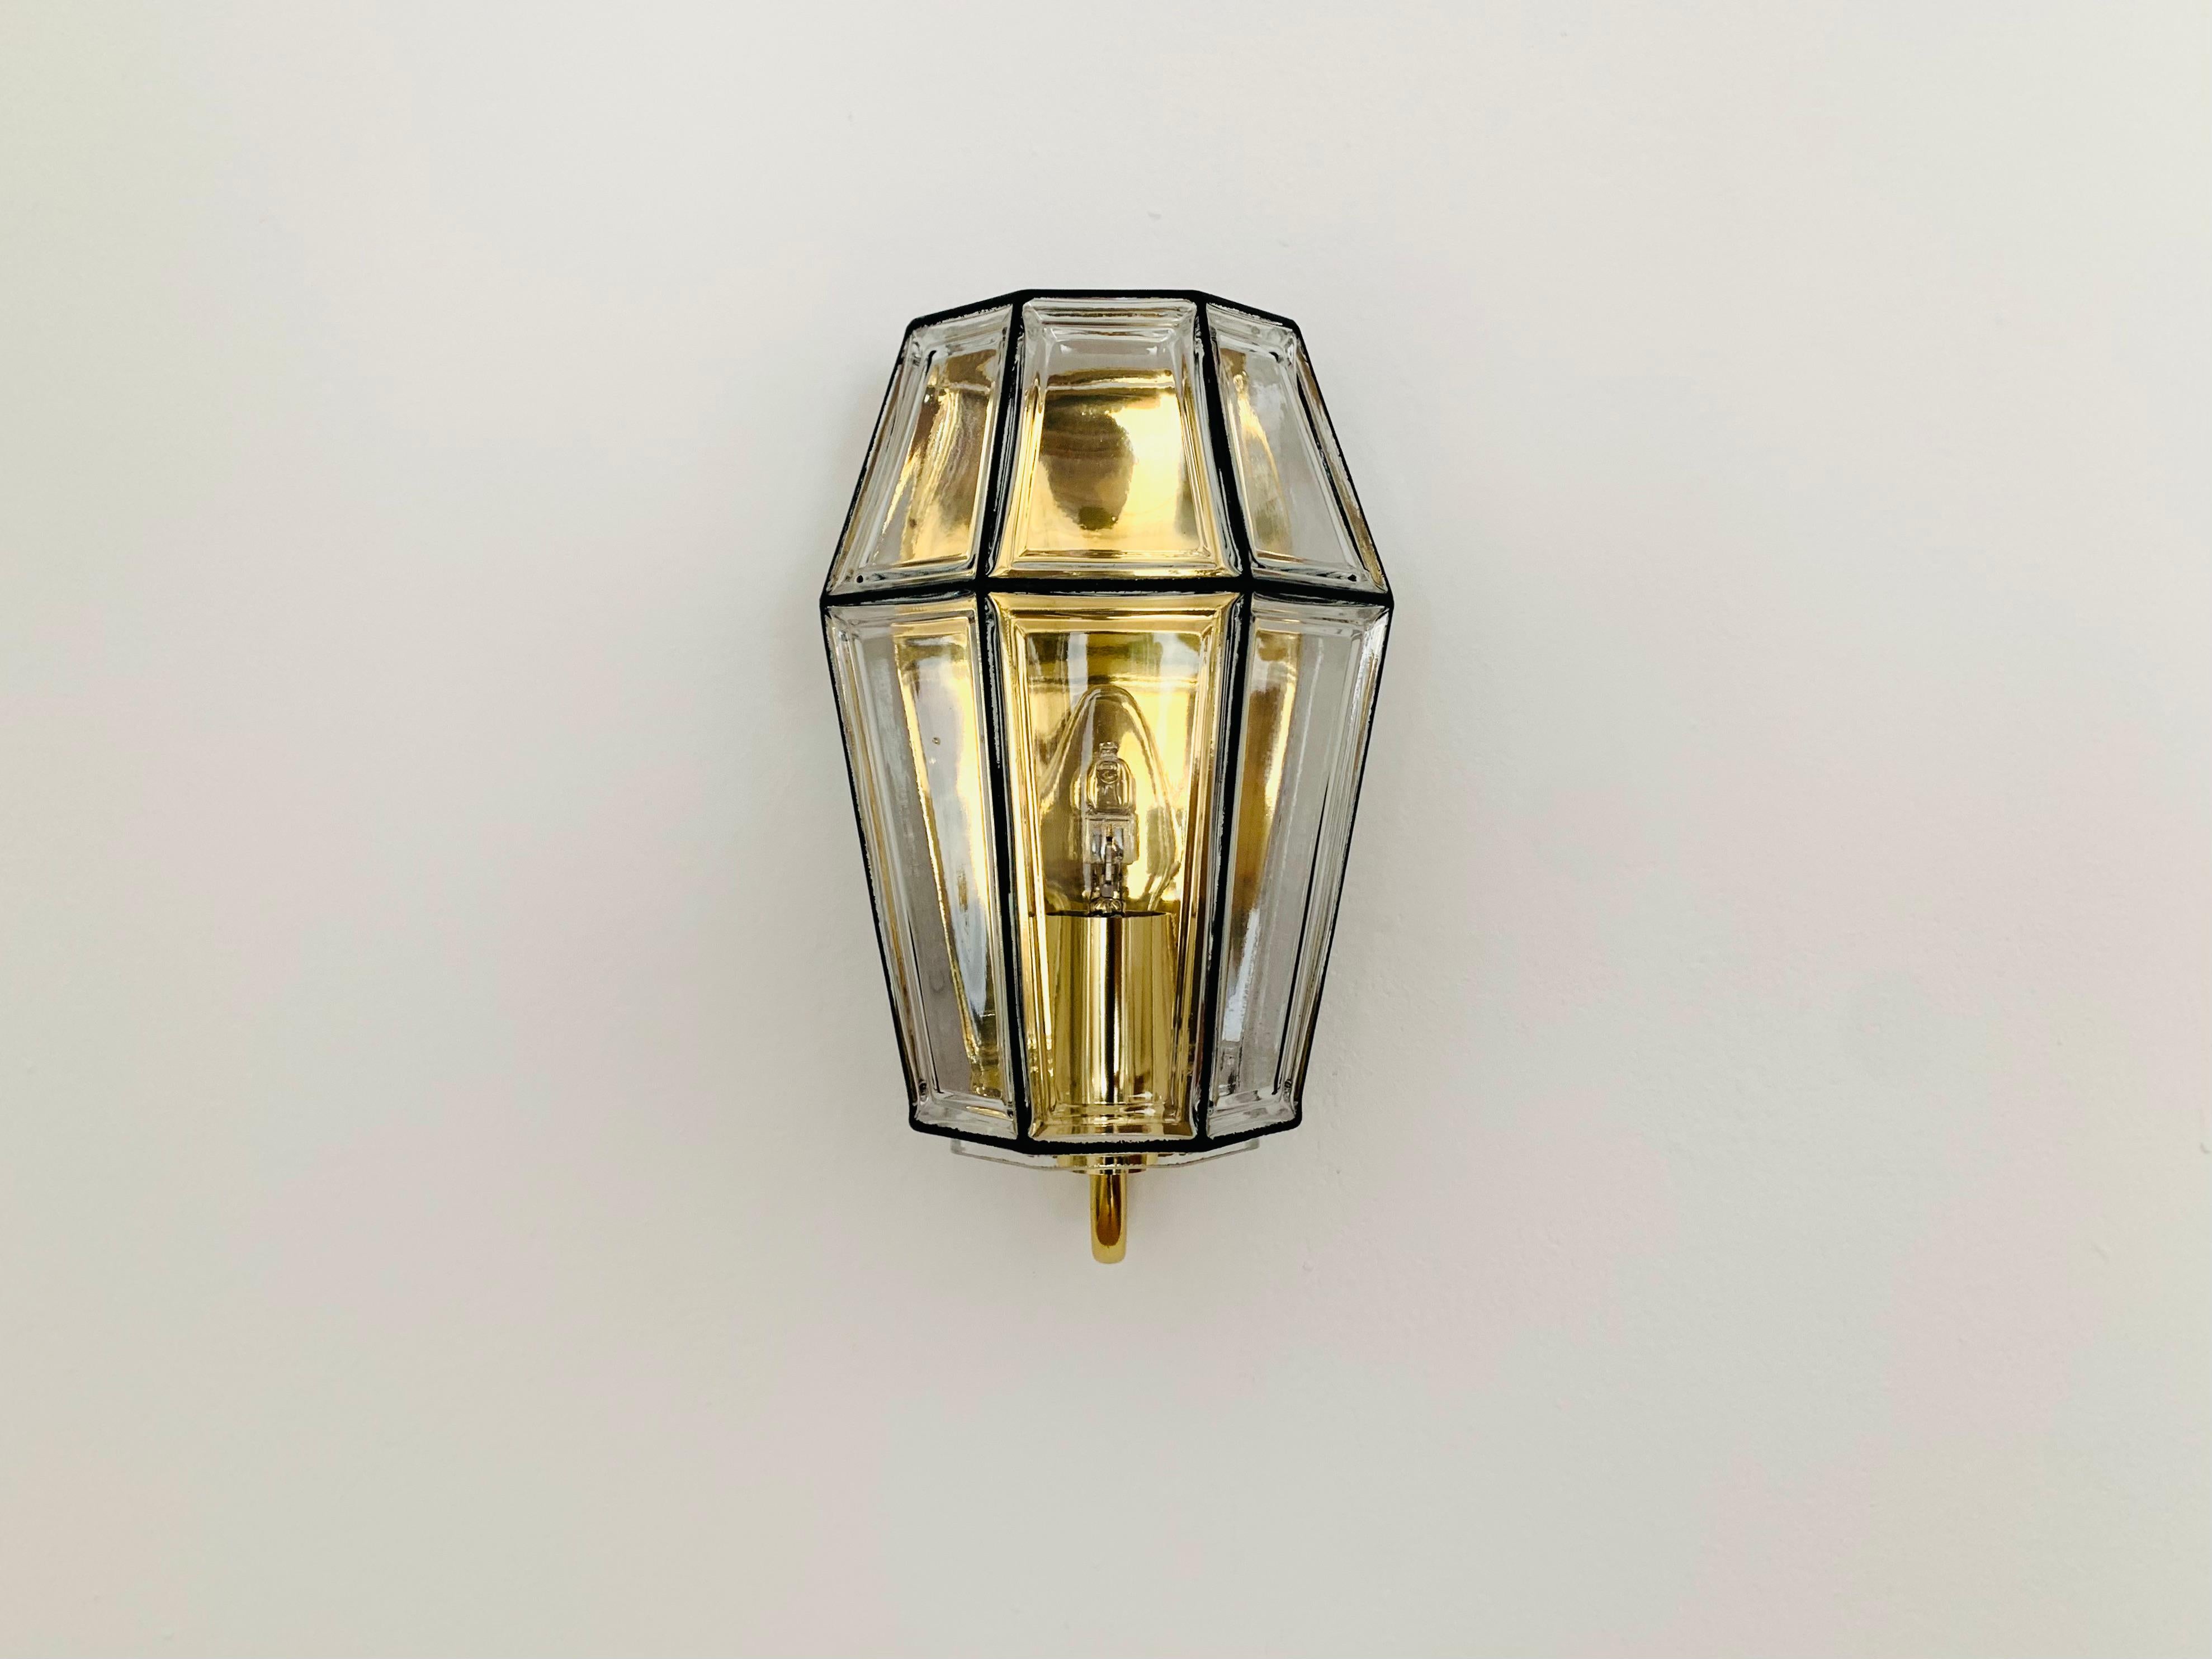 Very nice glass wall lamp from Glashütte Limburg.
The design creates a great play of light and enchants with its charisma.
Wonderful design and very high quality workmanship.

Manufacturer: Glashütte Limburg

Condition:

Very good vintage